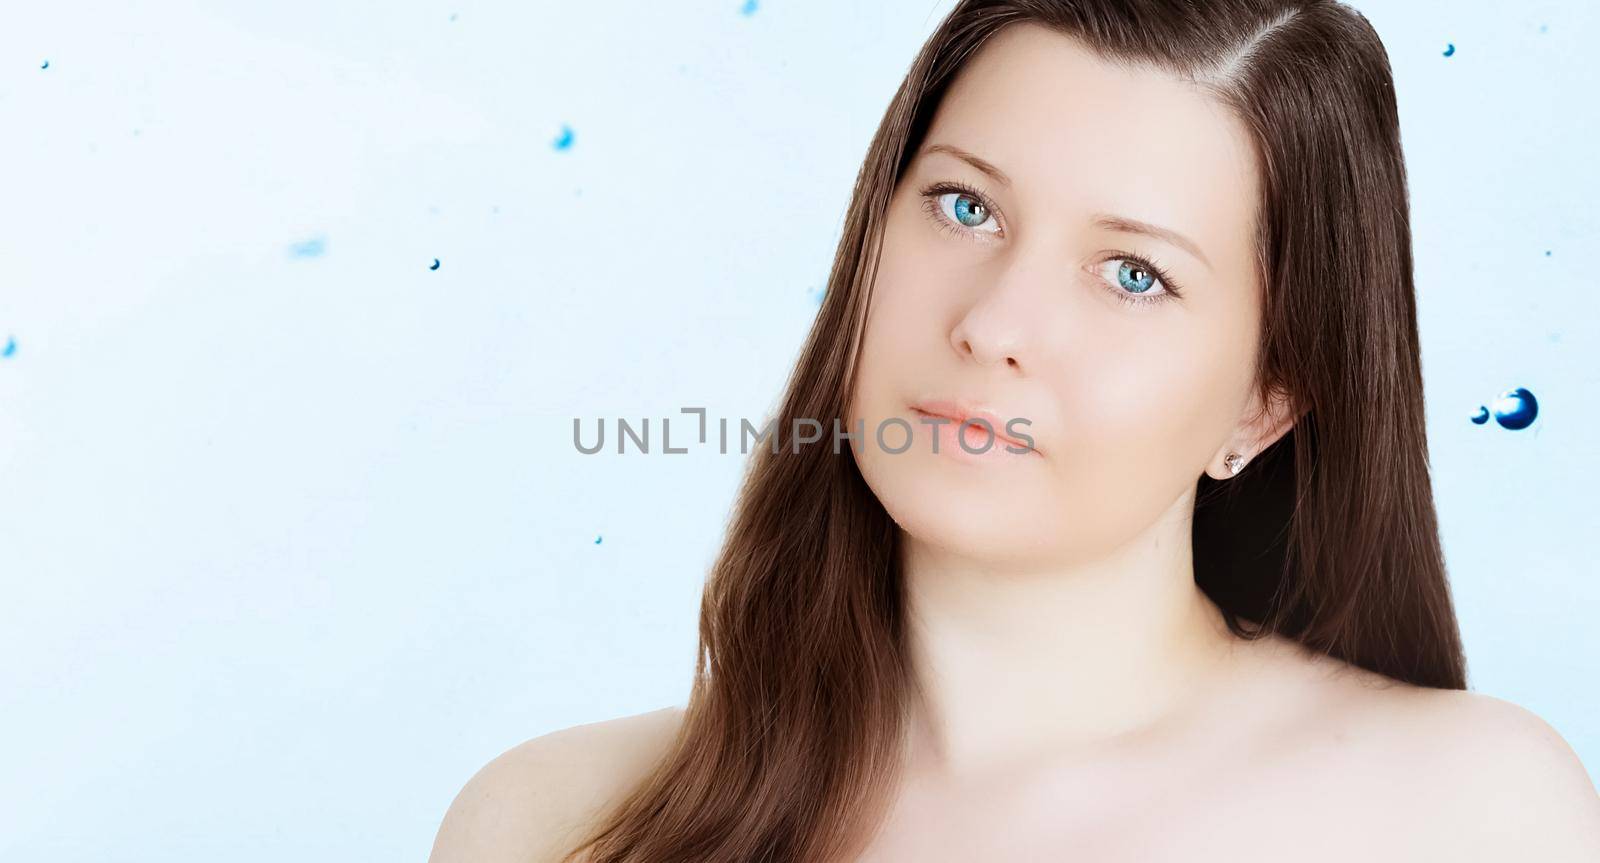 Rejuvenation skincare and beauty ad, beauty face portrait of young woman with healthy clean skin, blue cosmetic liquid drops on background by Anneleven